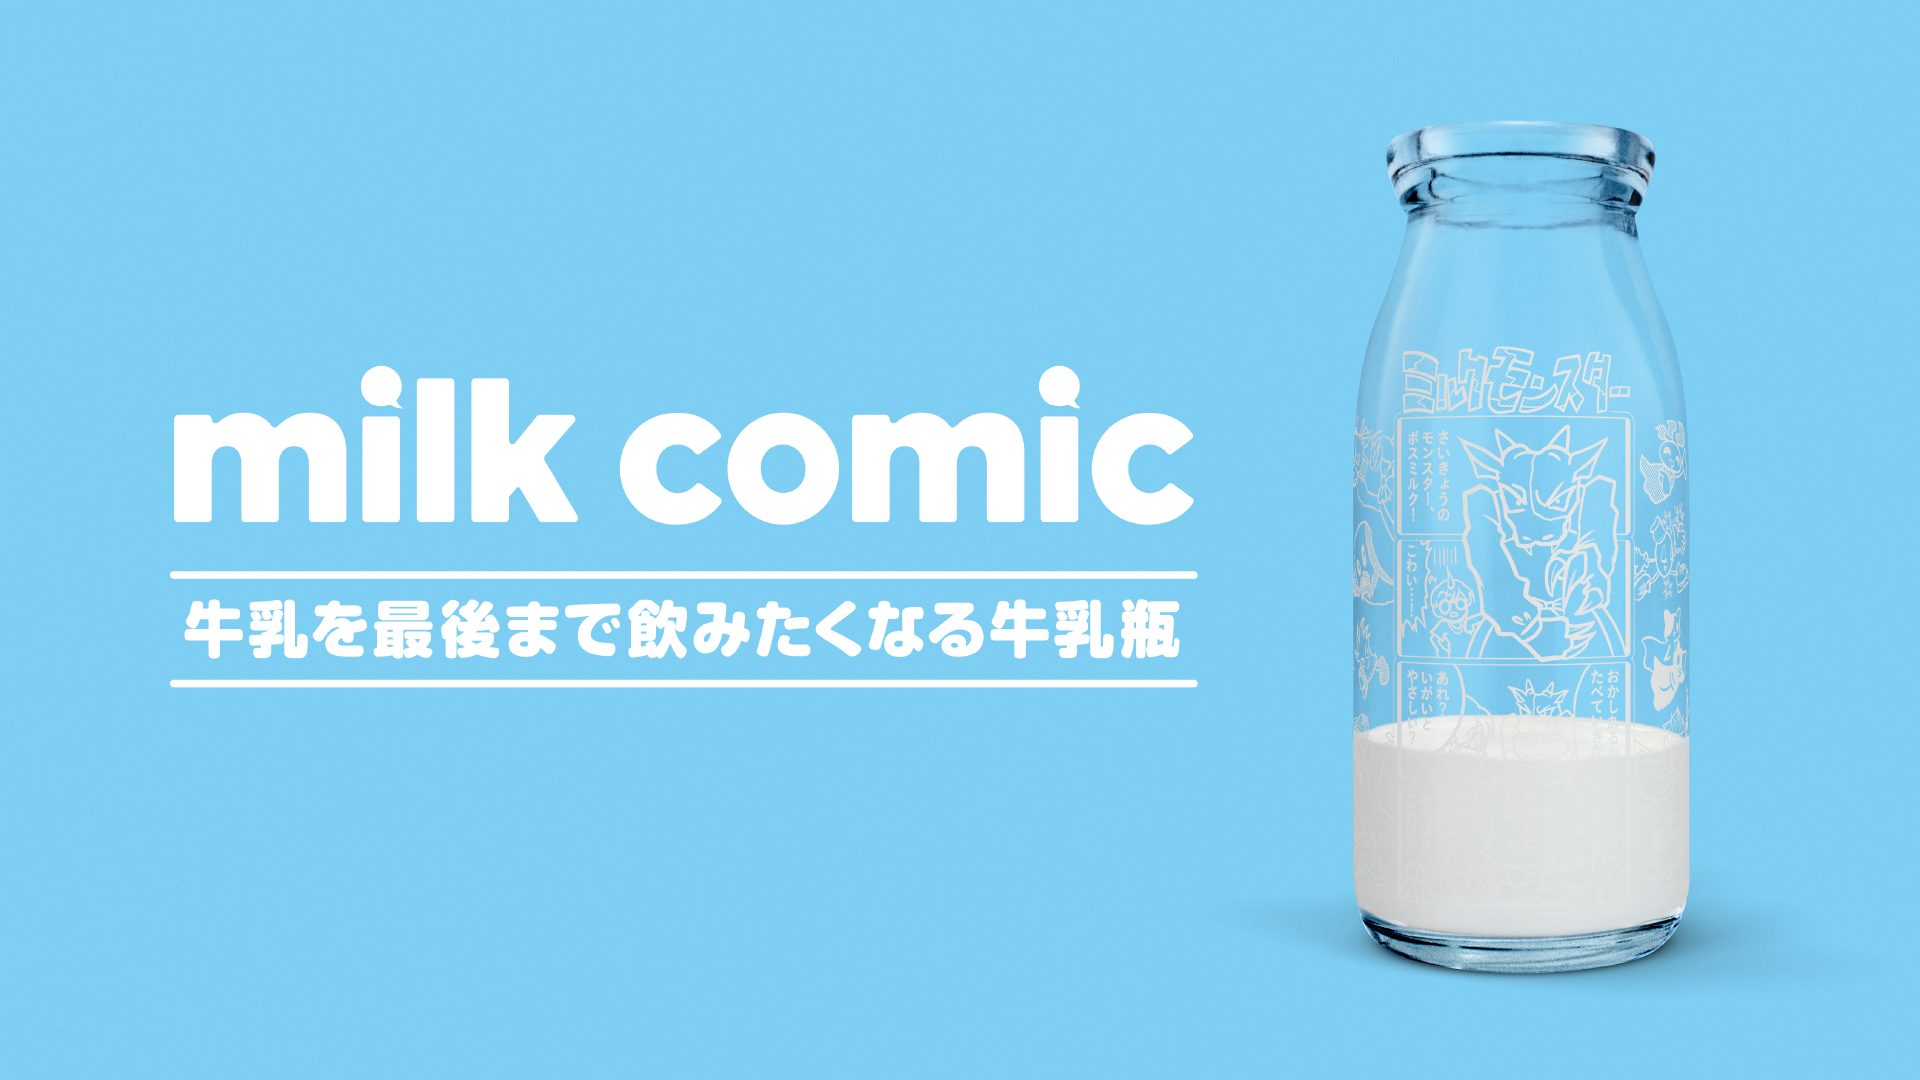 Want Kids To Drink Their Milk? Put a Manga Comic Inside the Bottle